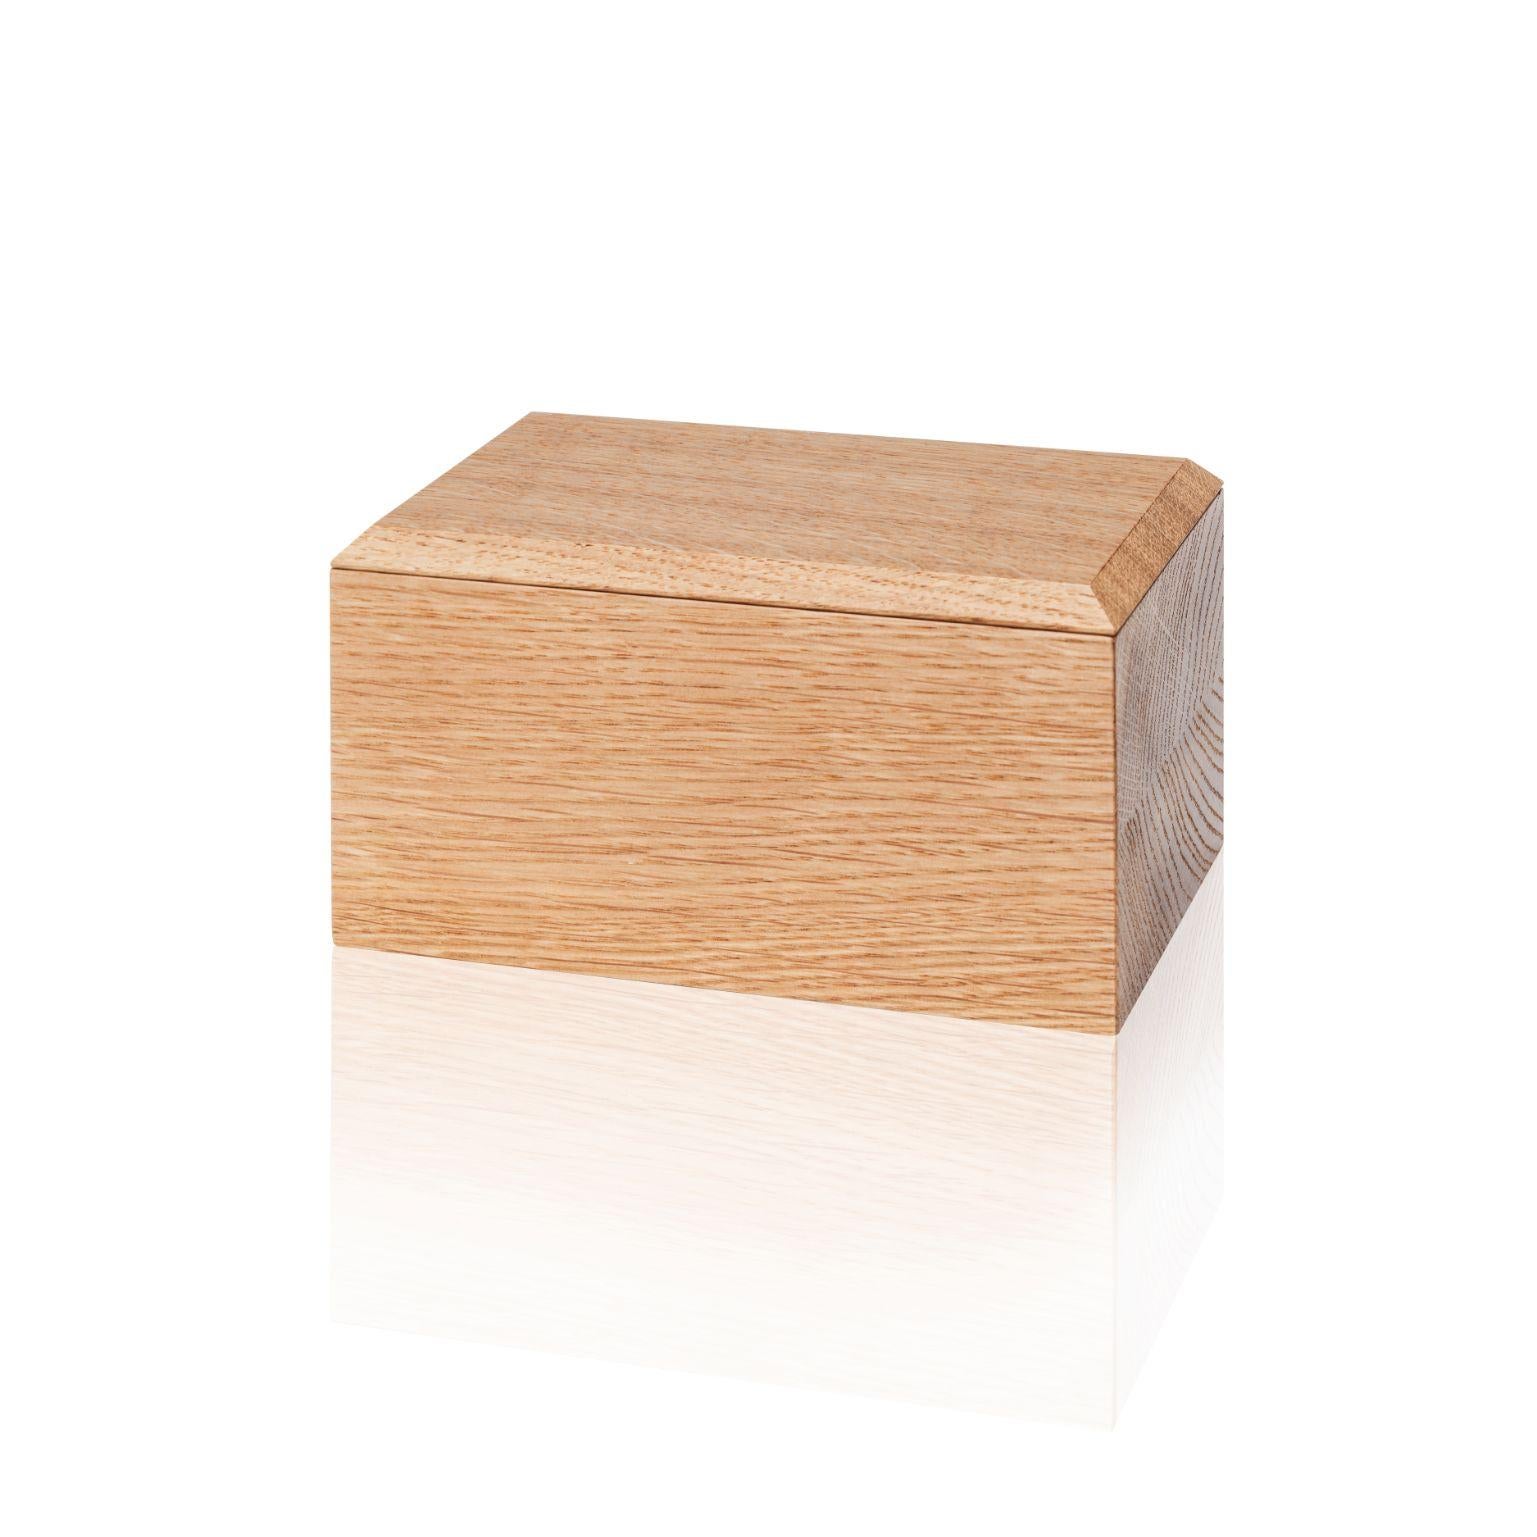 Butter Pino Boxes by Antrei Hartikainen
Materials: Oak, Natural Oil Wax
Dimensions: W 18 / 14, D 9, H 5 / 7cm

A set of three vertical and two horizontal stacking boxes constructed of vividly grained woods. The pino boxes may be arranged in various